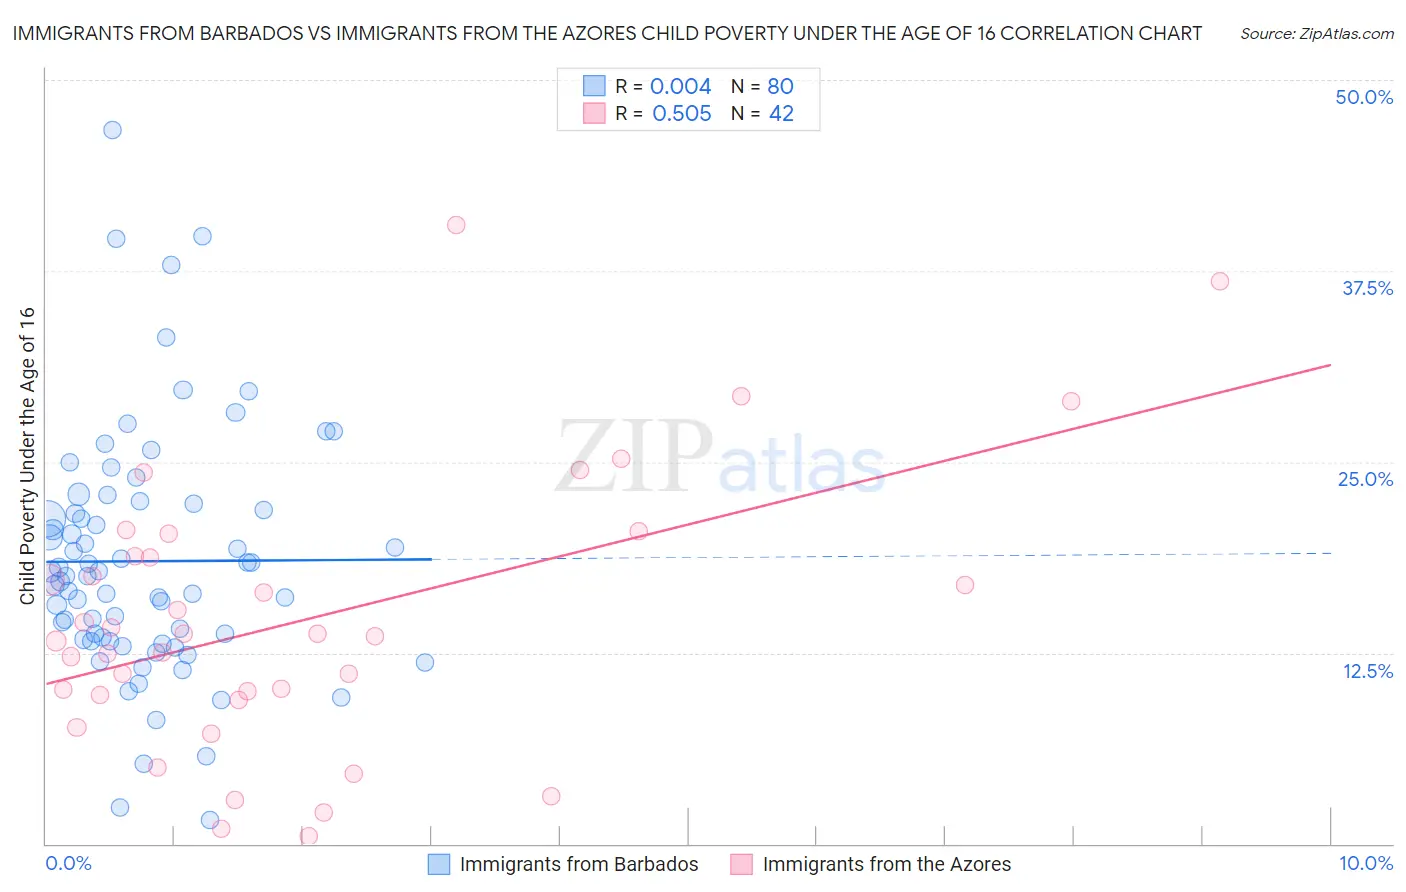 Immigrants from Barbados vs Immigrants from the Azores Child Poverty Under the Age of 16